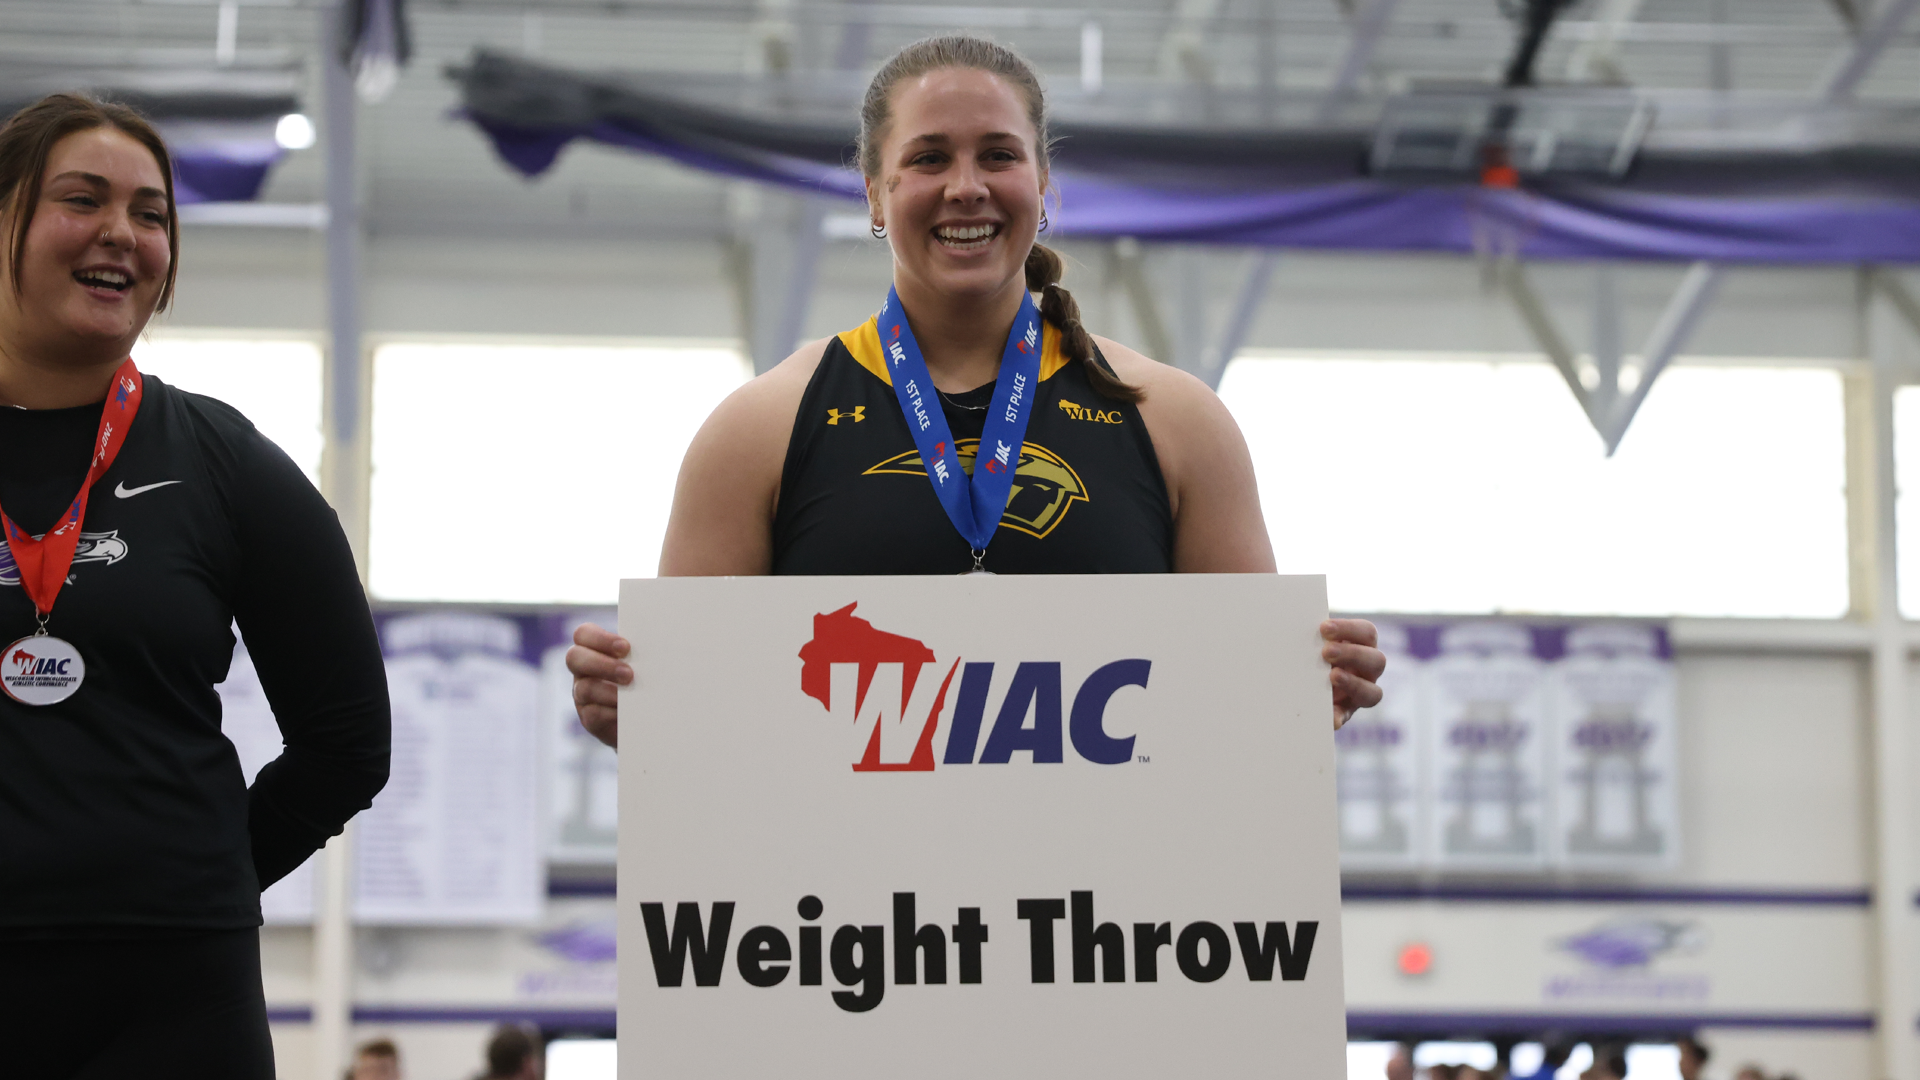 Brenna Masloroff won the 20-lb. weight throw with an 18.08-meter mark in day two of the WIAC Championship on Saturday. Photo Credit: Steve Frommell, UW-Oshkosh Sports Information